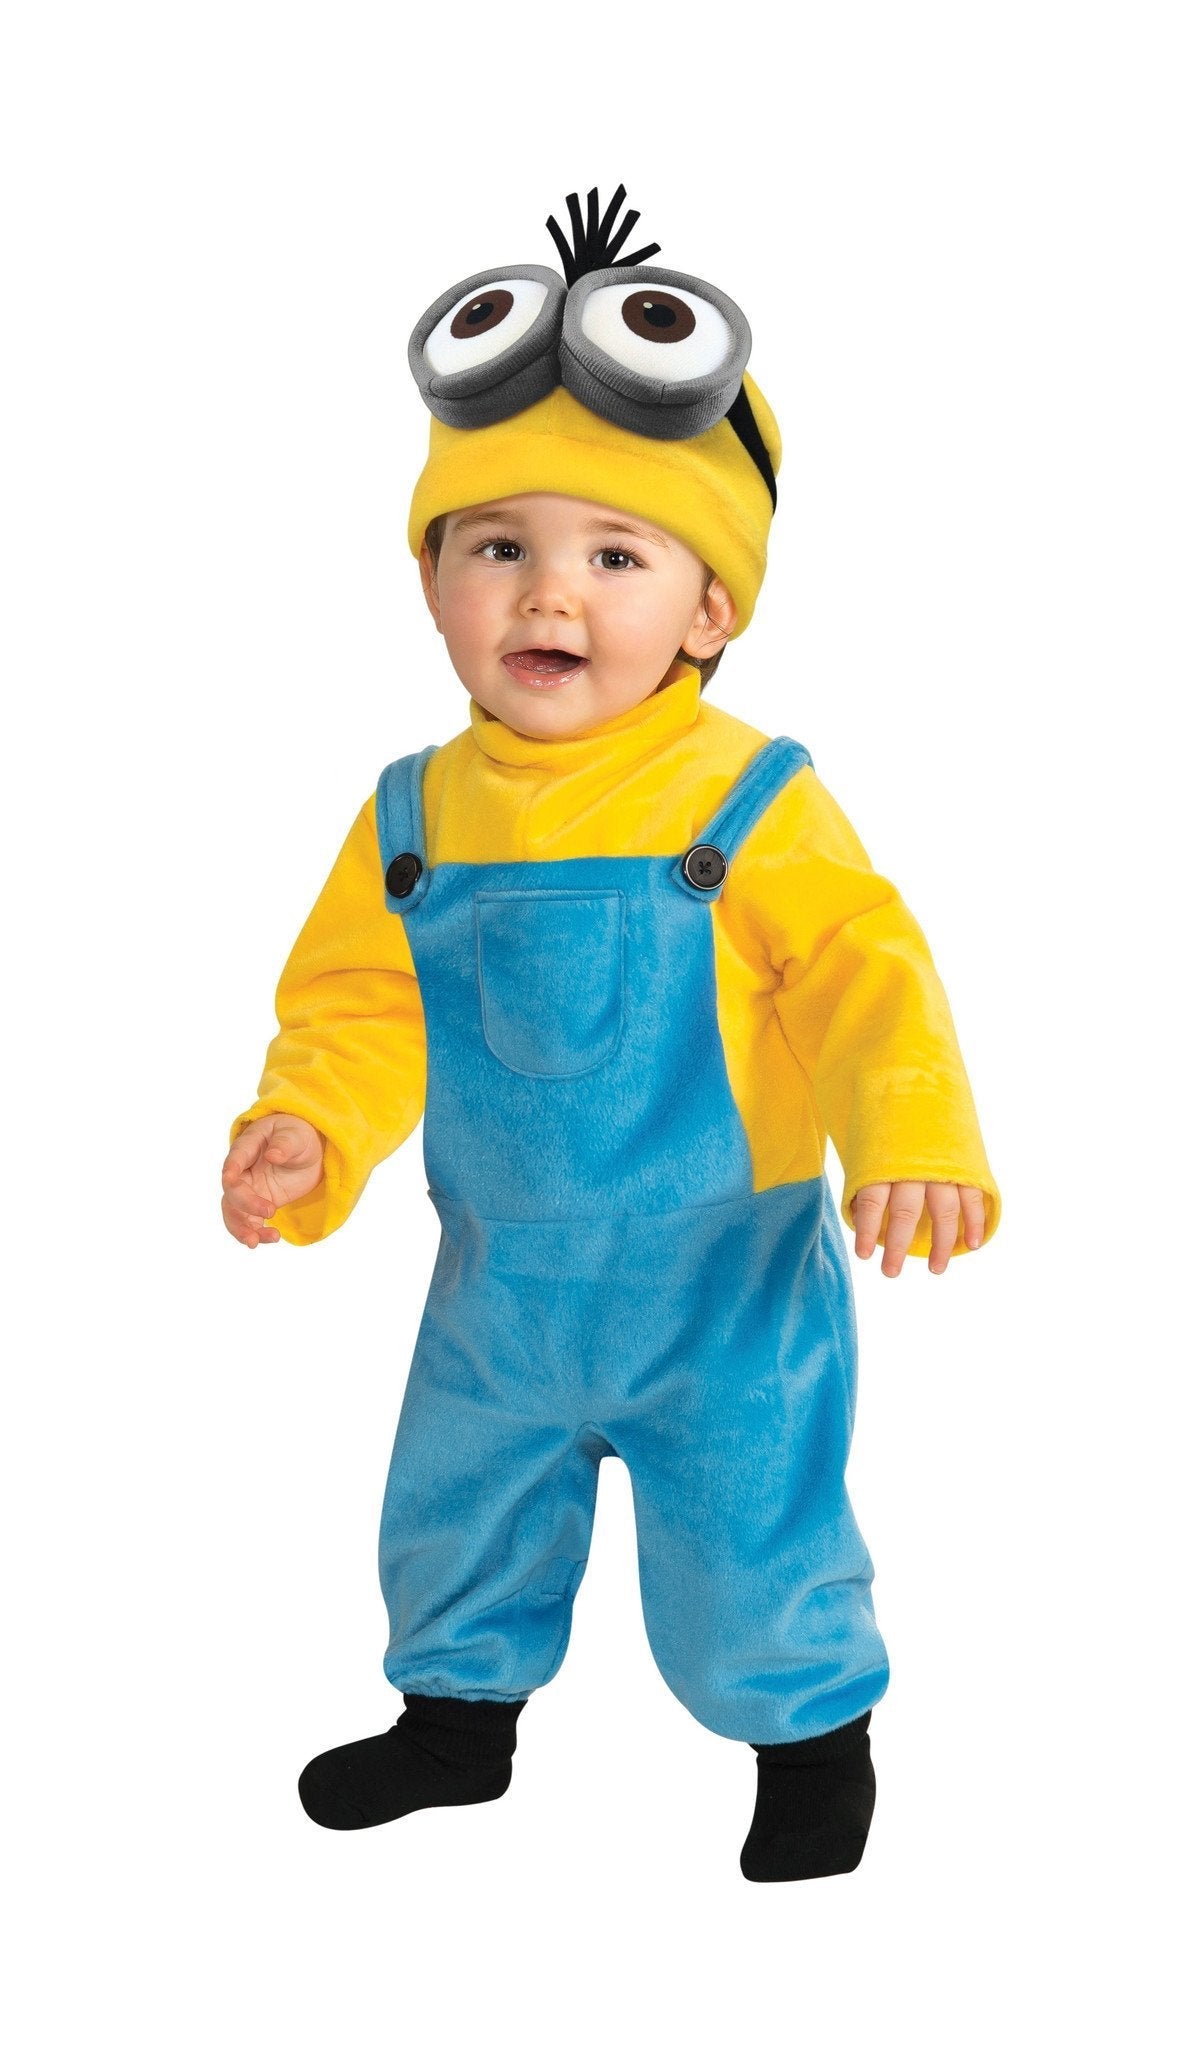 Minion Kevin Costume for Toddlers - Universal Despicable Me